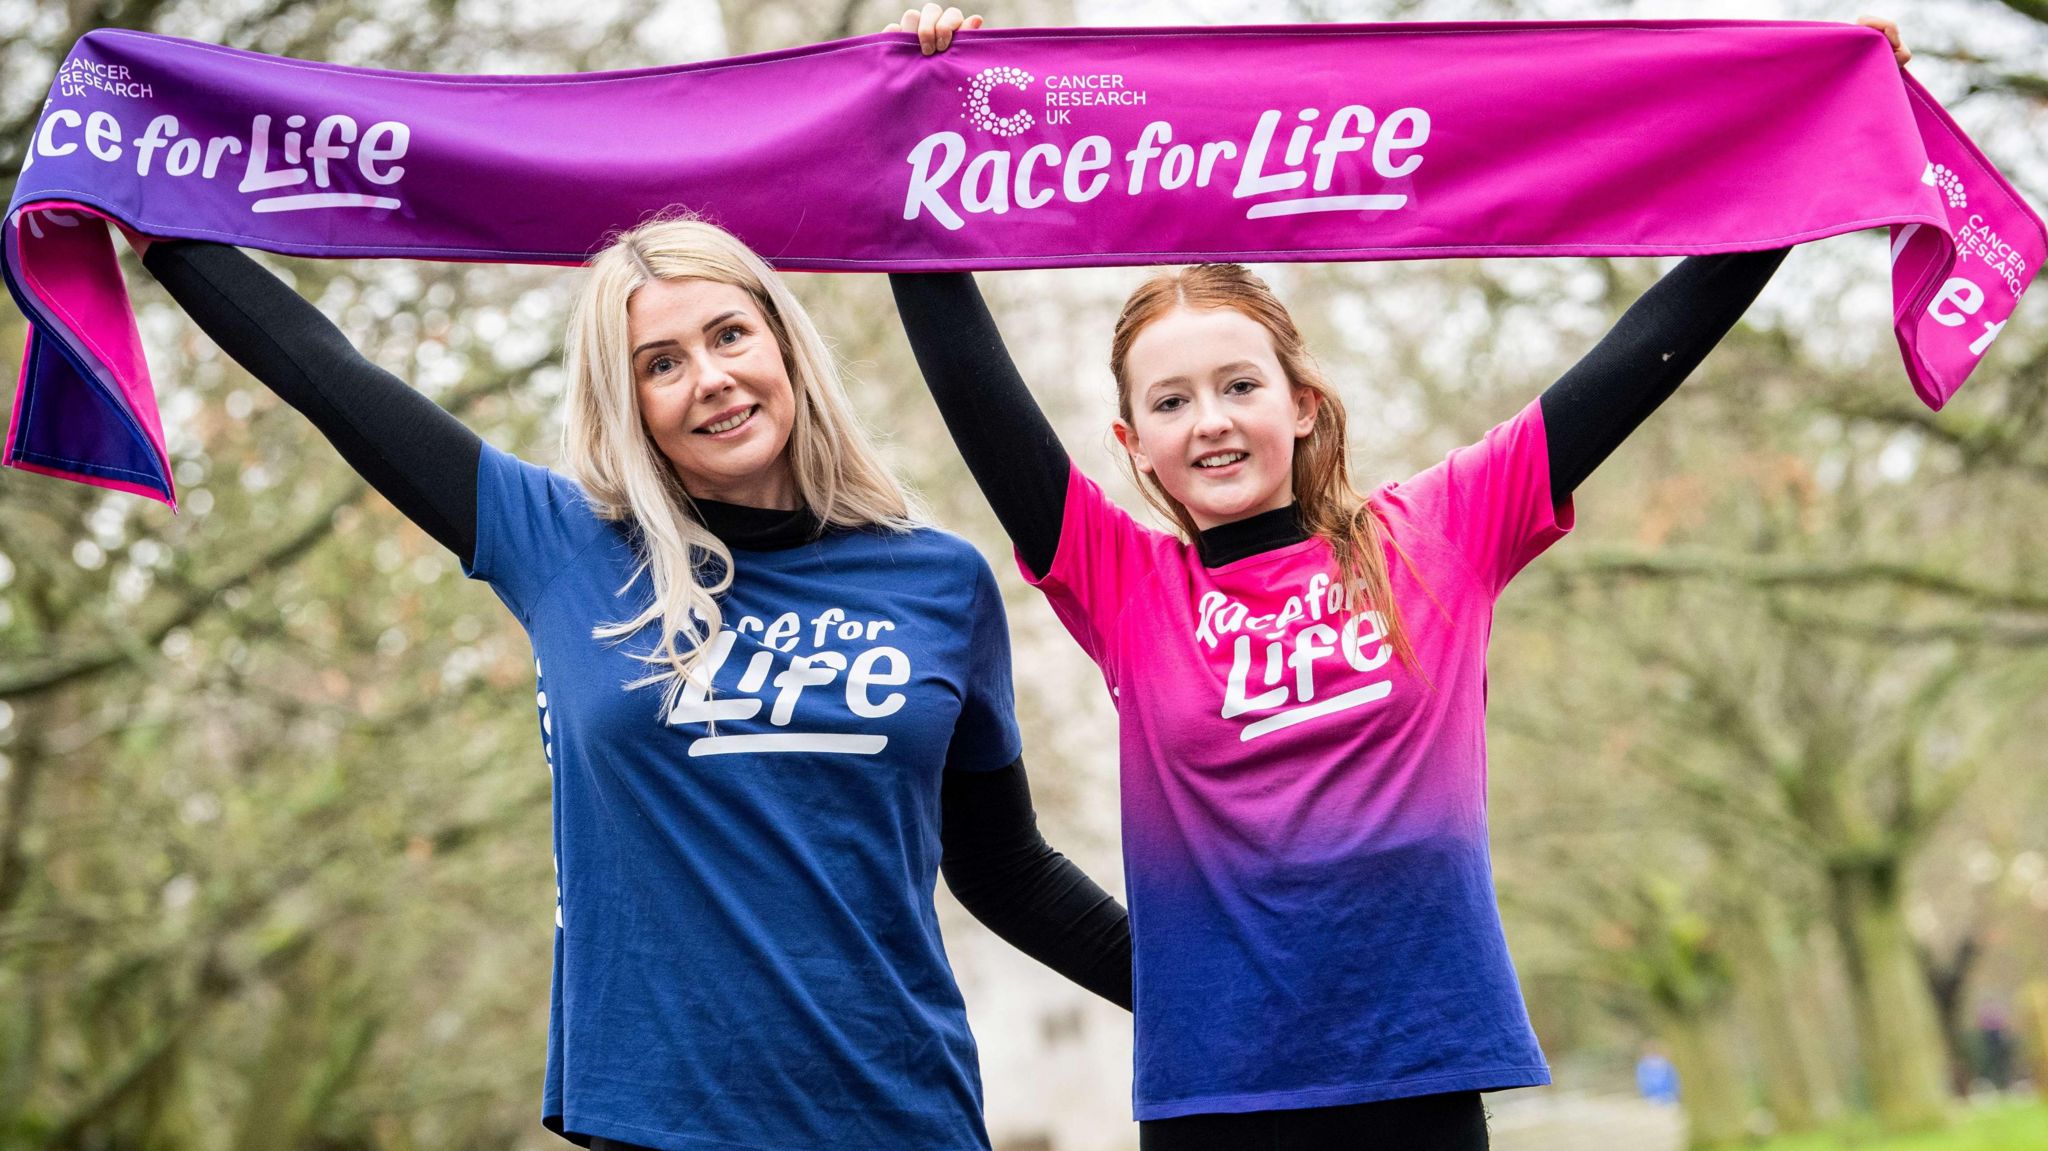 Gemma and her daughter Macy holding a Race for Life banner